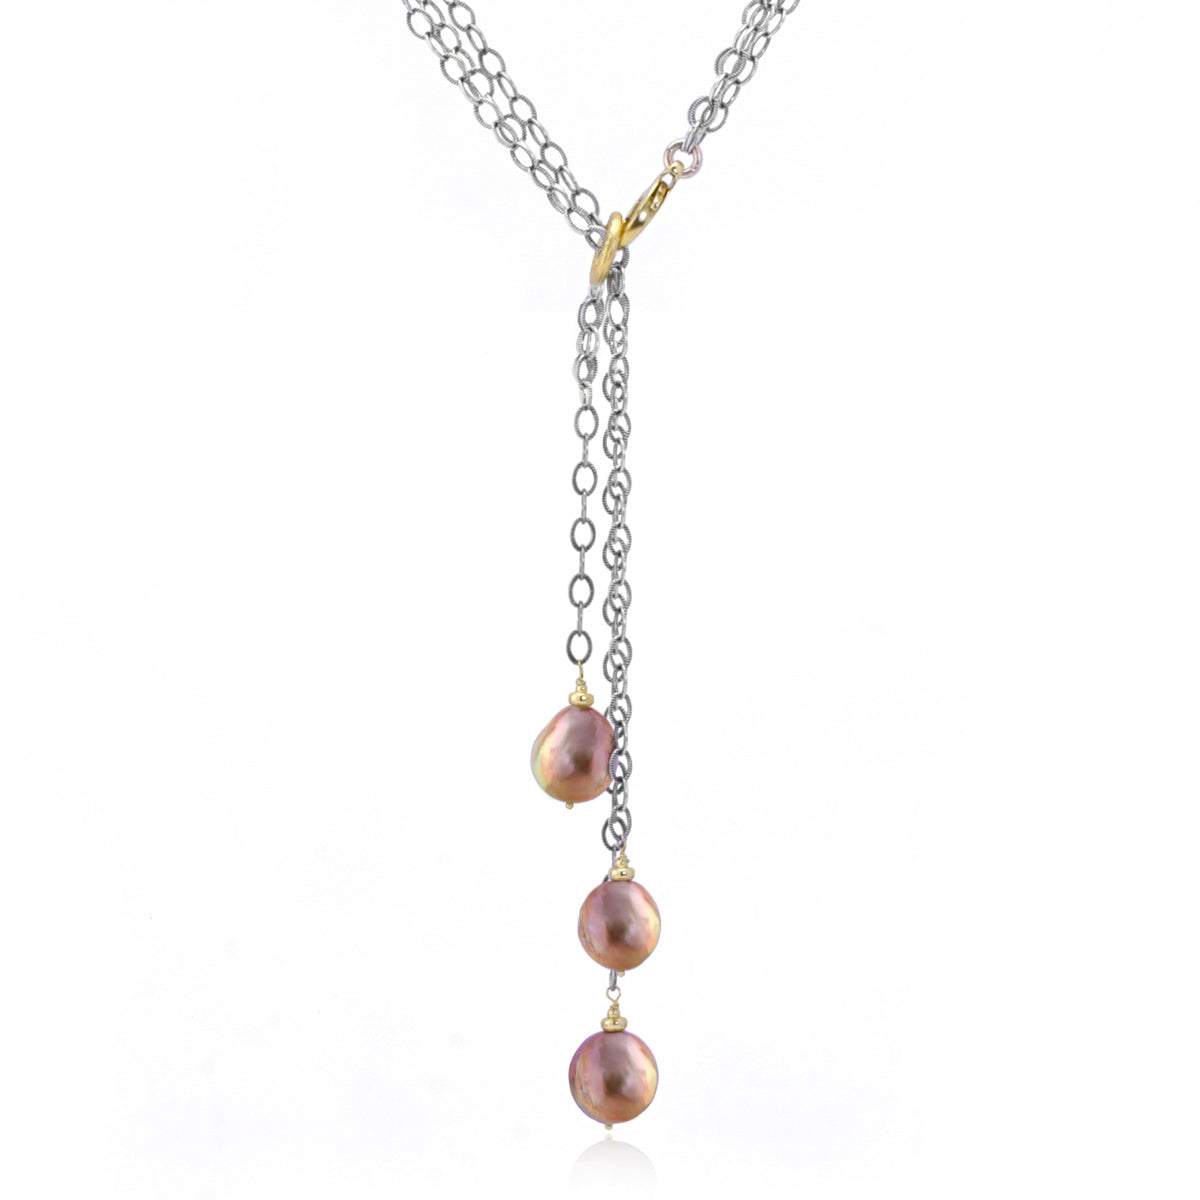 Fireball Pearl Lariat Necklace